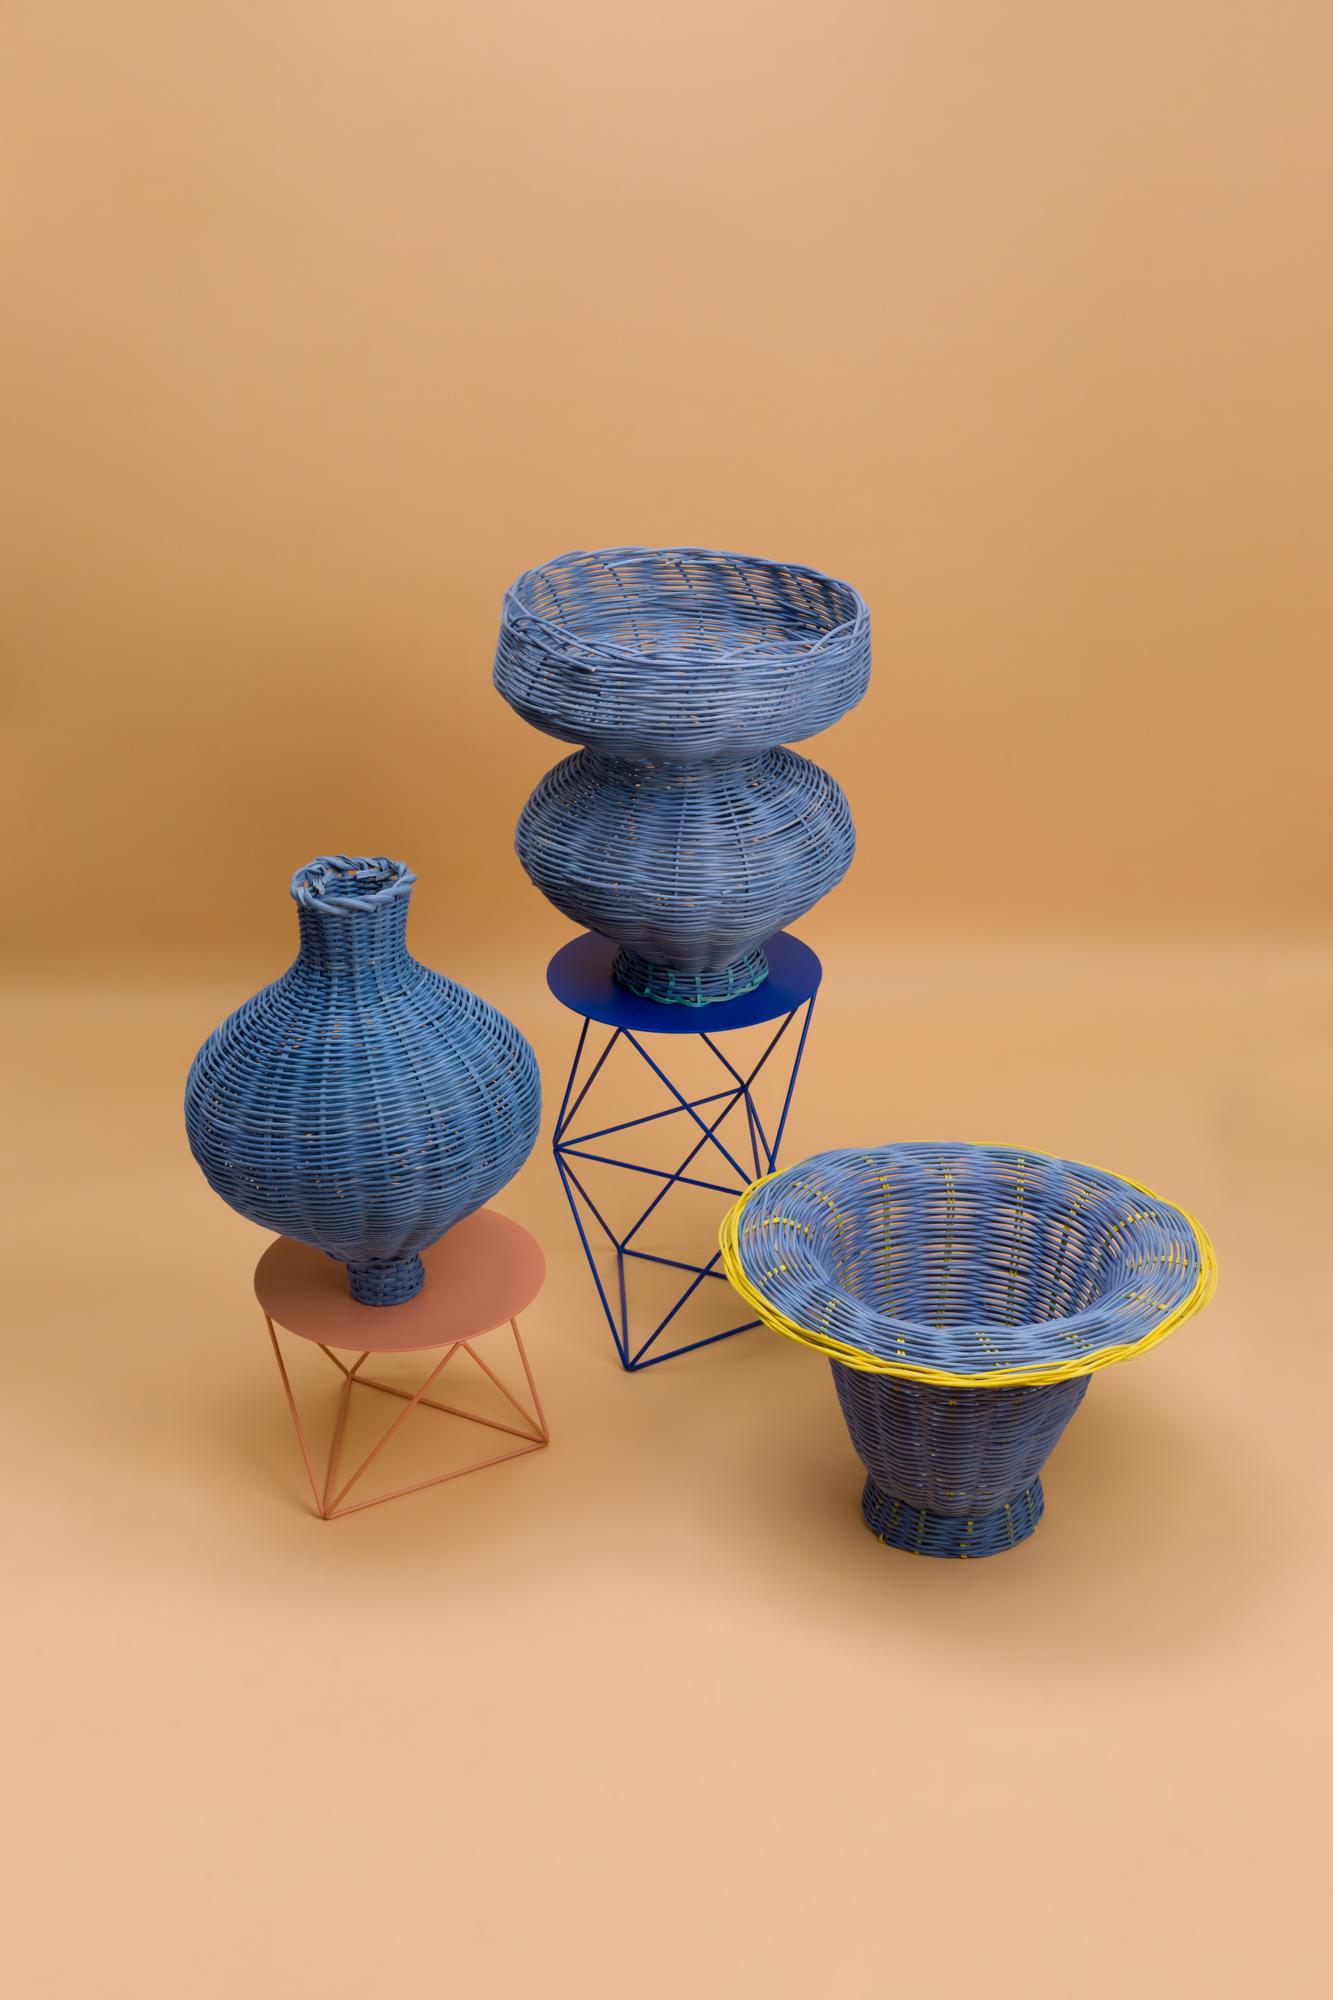 North American Petal Vase Hand Woven in Blue, and Lemon Dyed Reed by Studio Herron